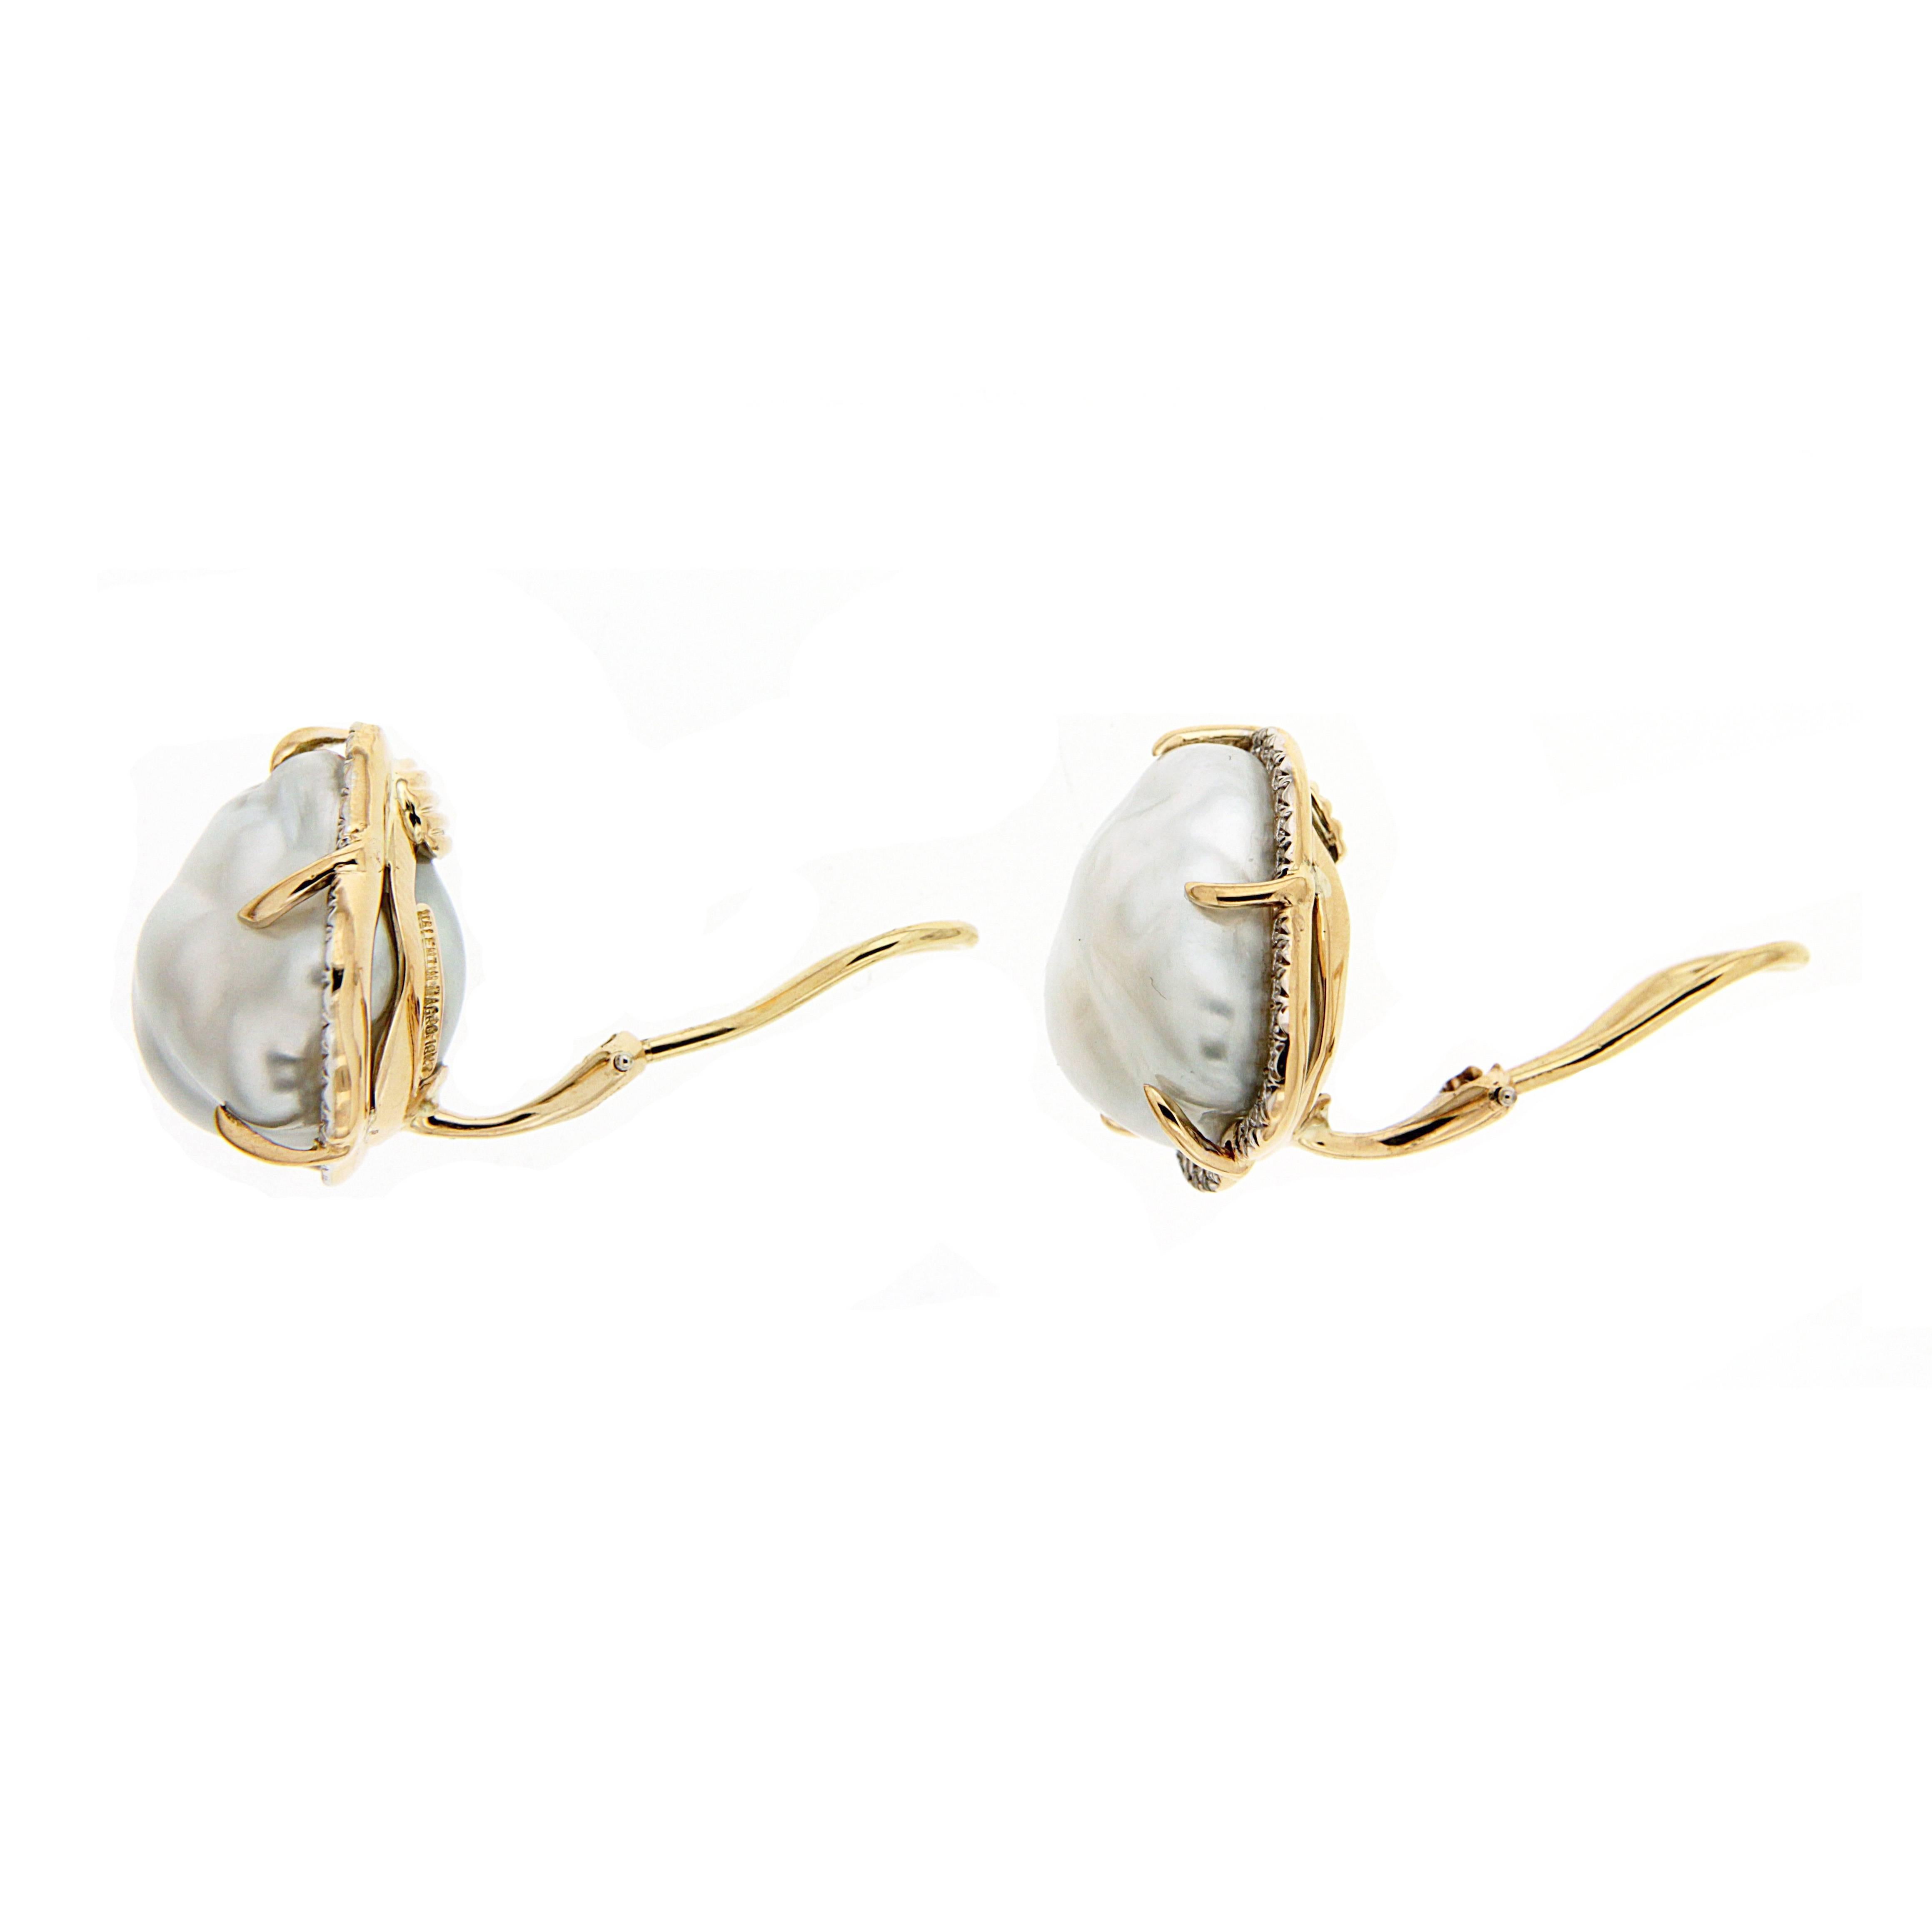 This pair of clip-on earrings features Baroque Pearls with Pave Diamonds and gold claws motifs. The earrings are finished in 18kt Yellow Gold. Posts can  be added upon request.